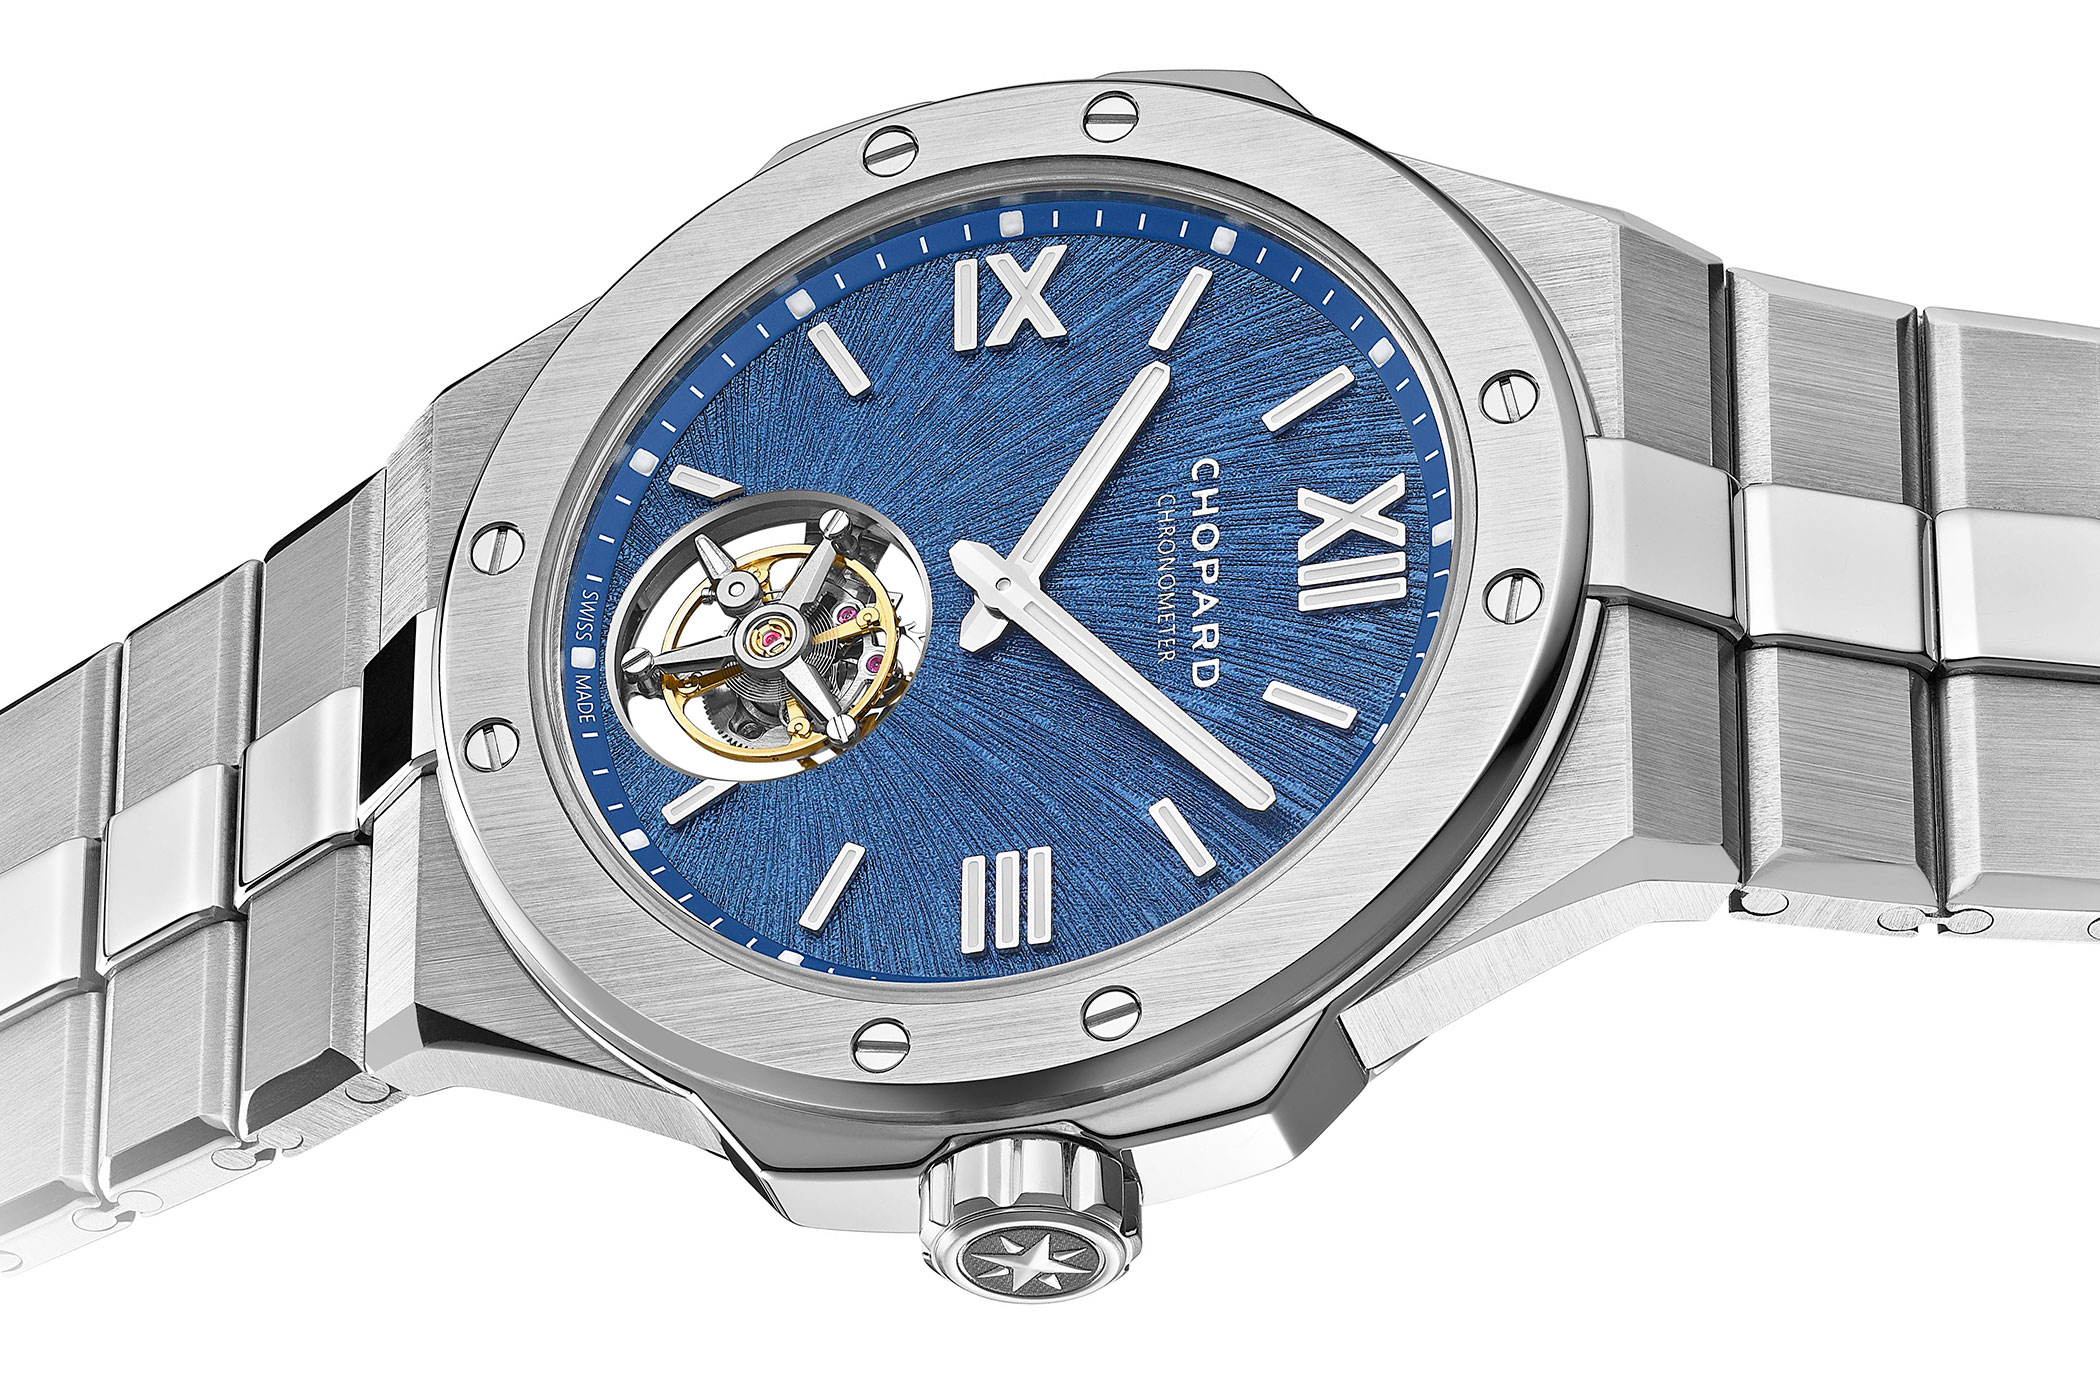 Chopard Alpine Eagle Stainless Steel Sport Watches: Price, Specs - Bloomberg